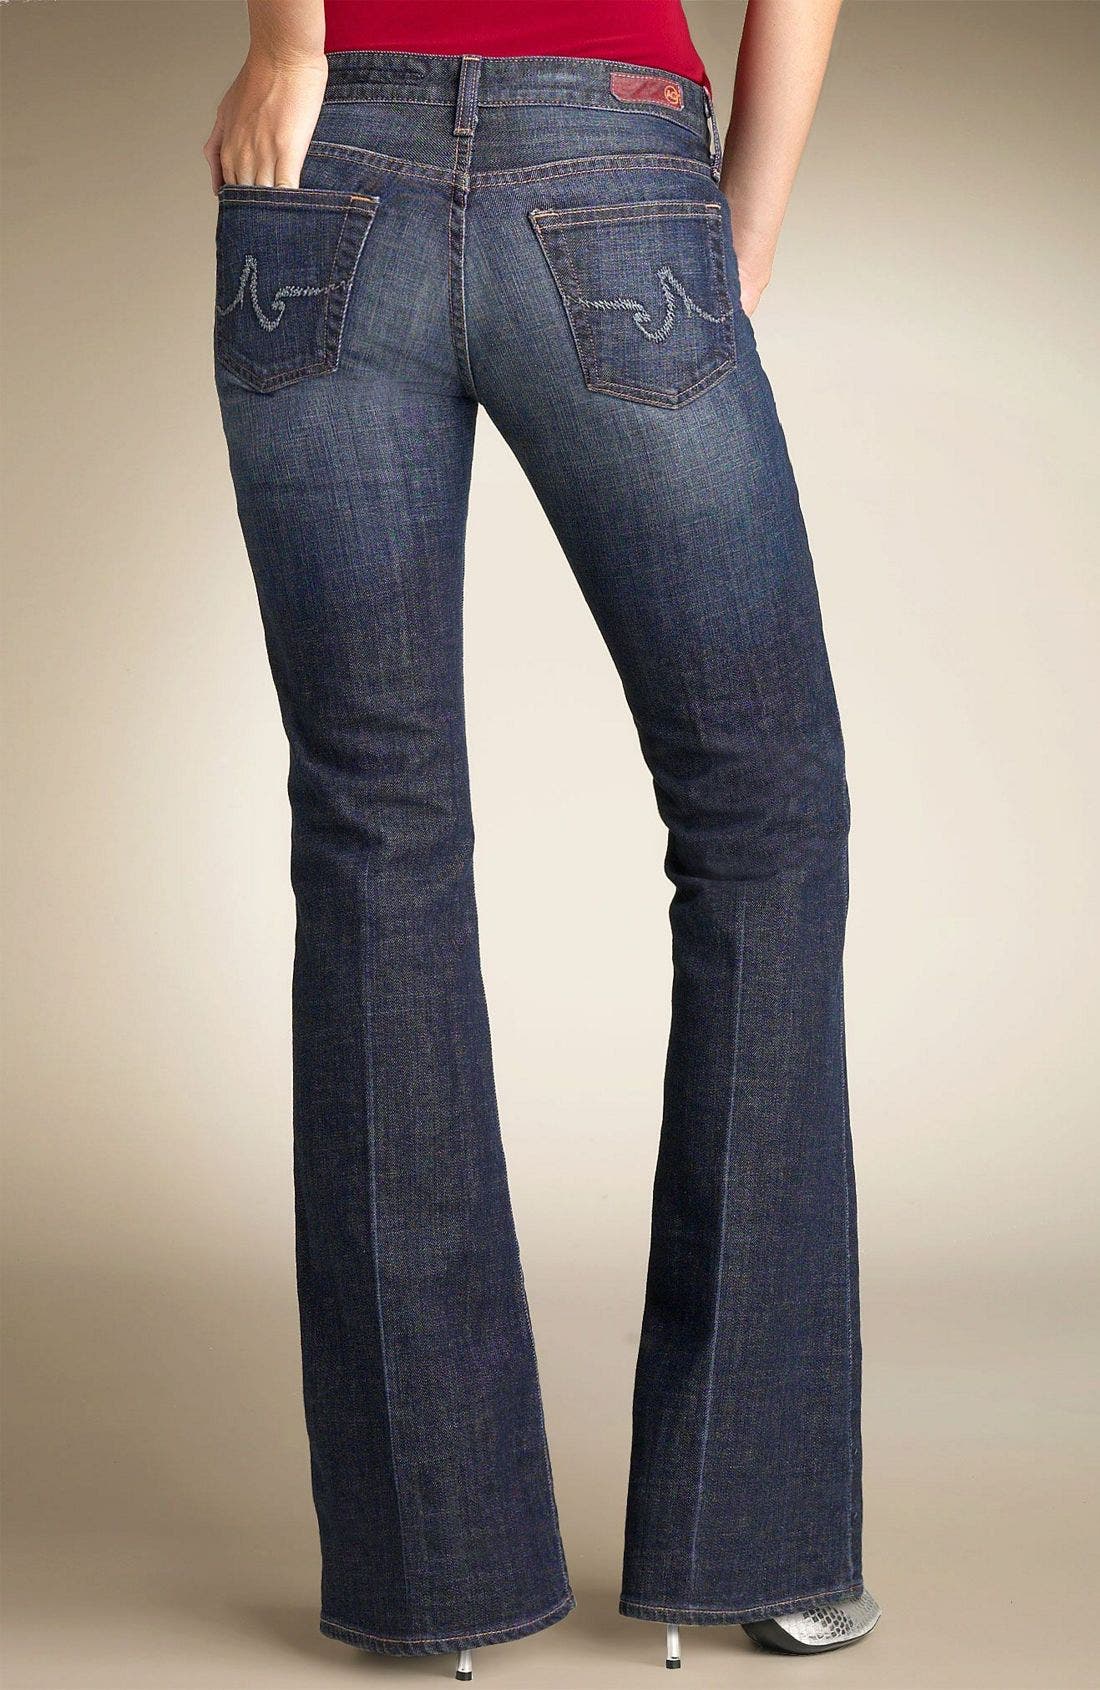 used cinch jeans